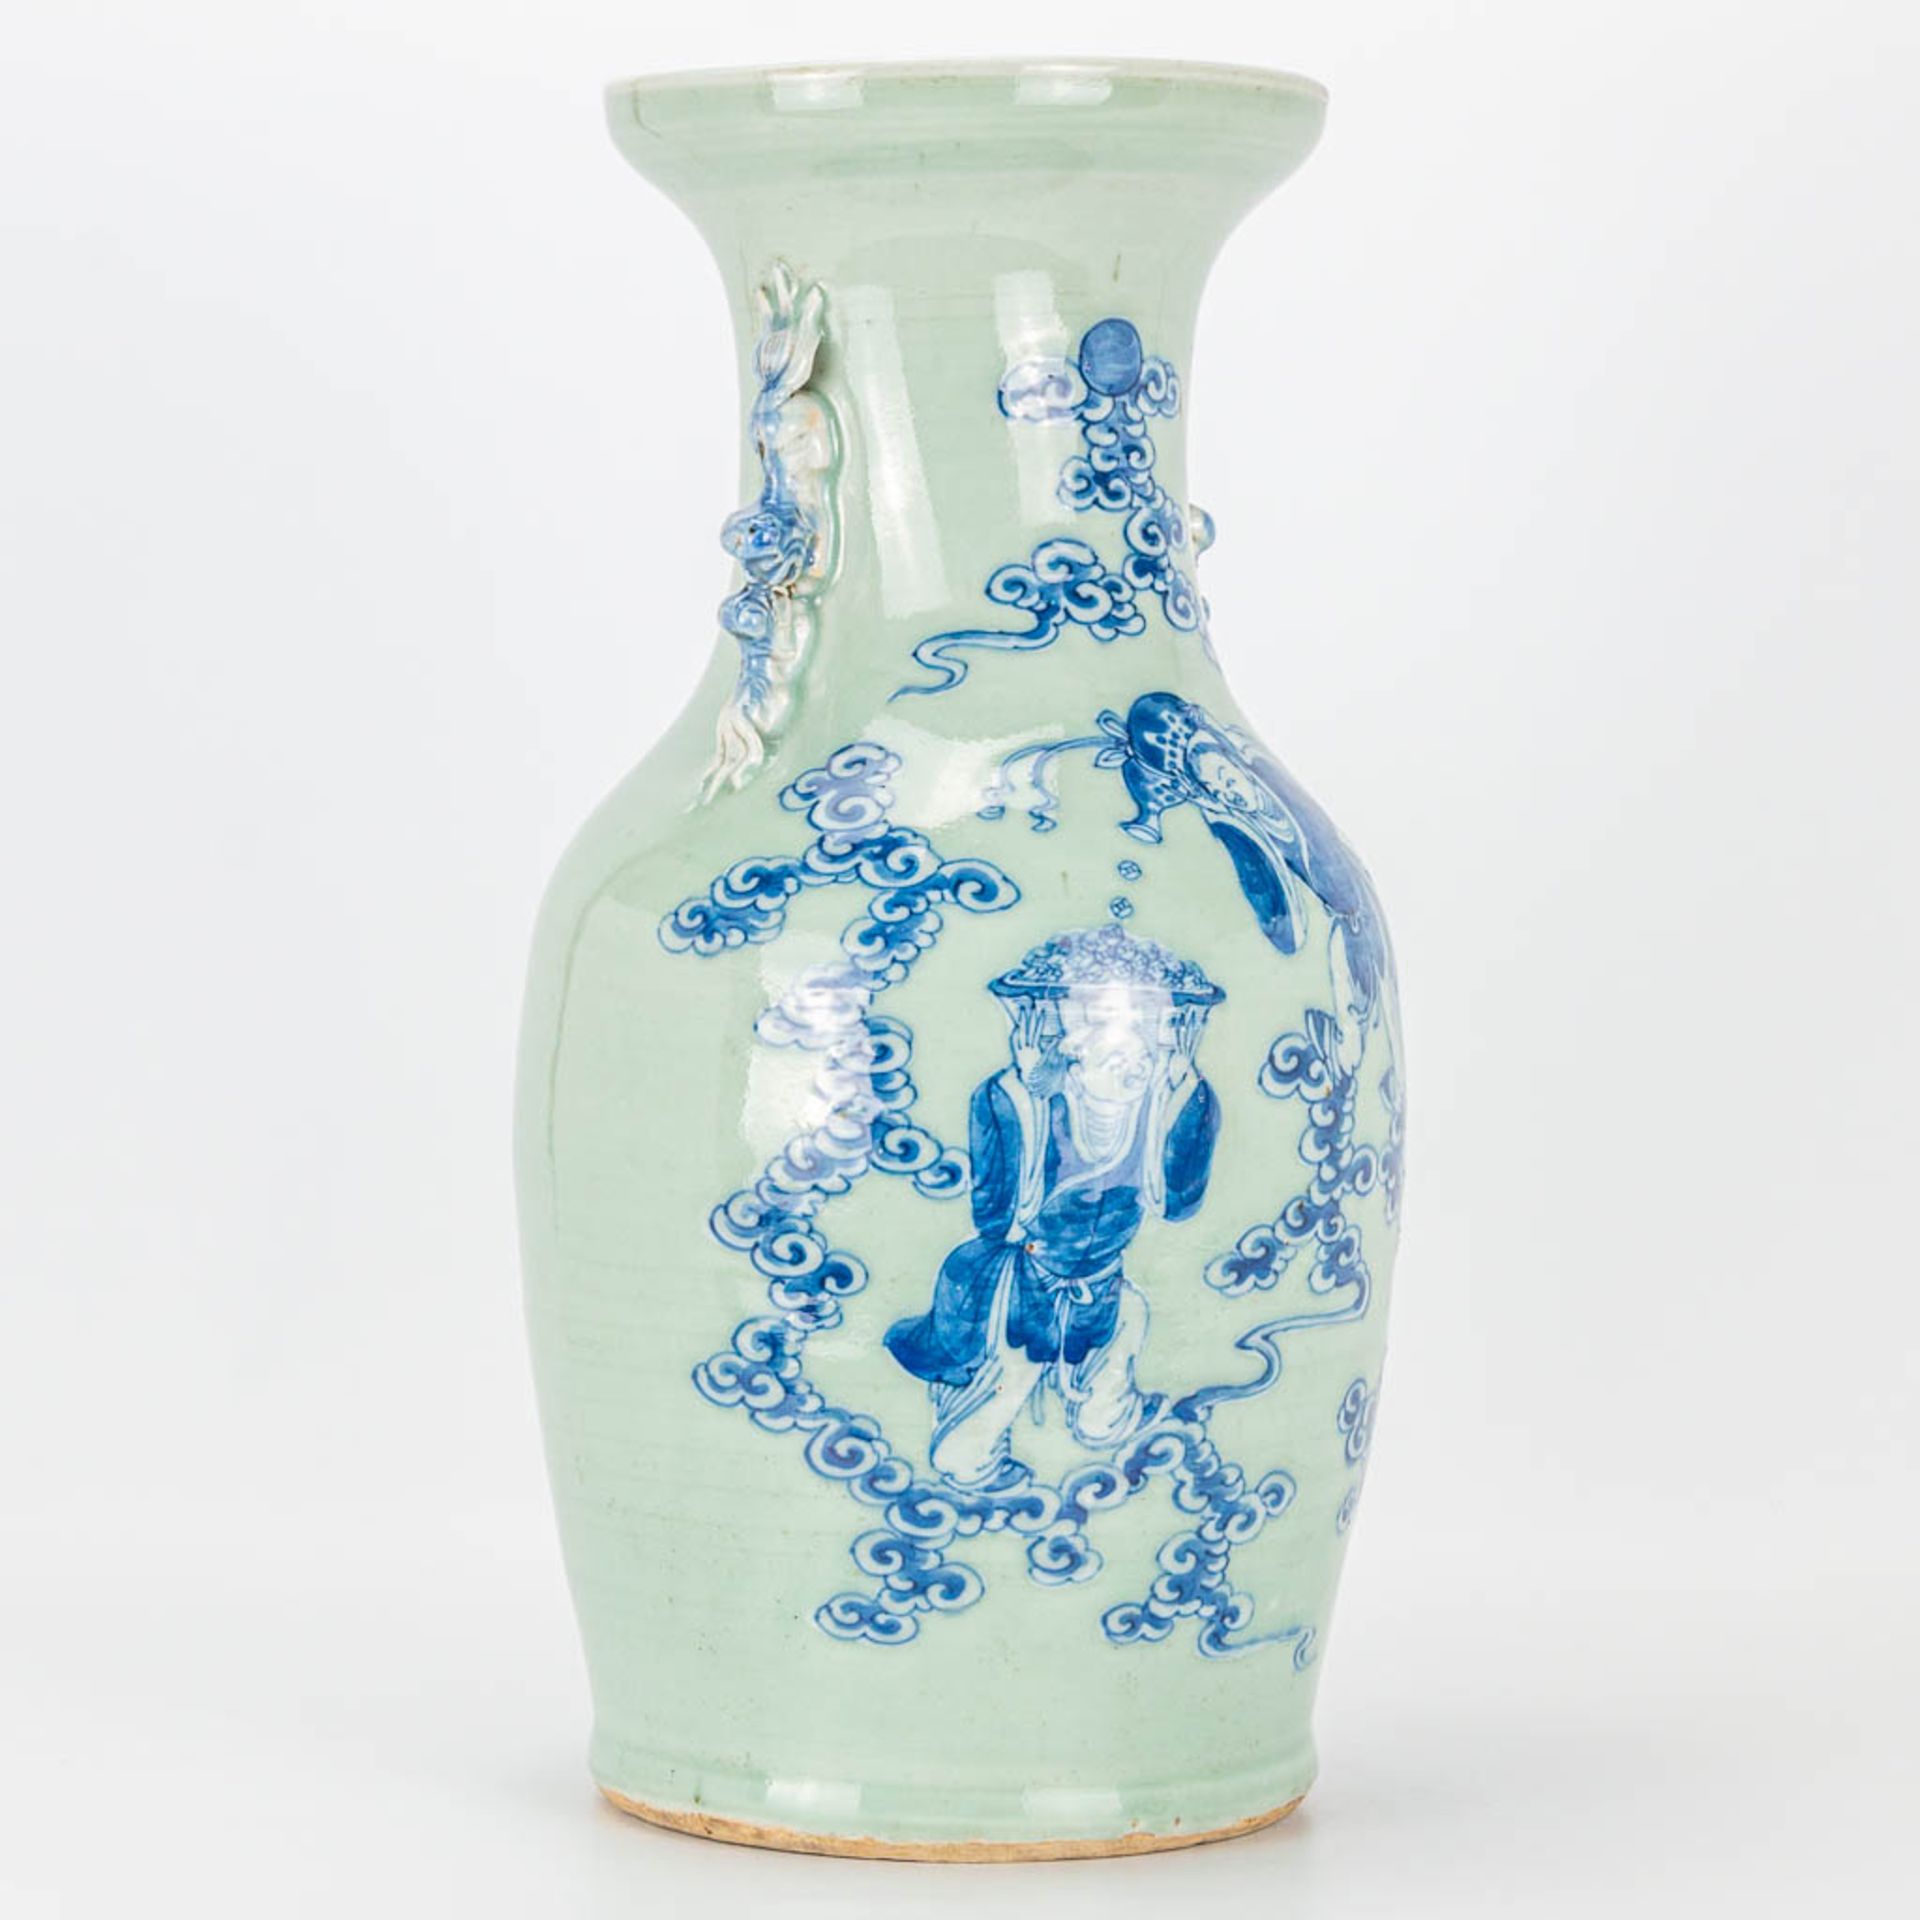 A vase made of Chinese porcelain with a blue-white decor. 19th/20th century. - Image 6 of 14